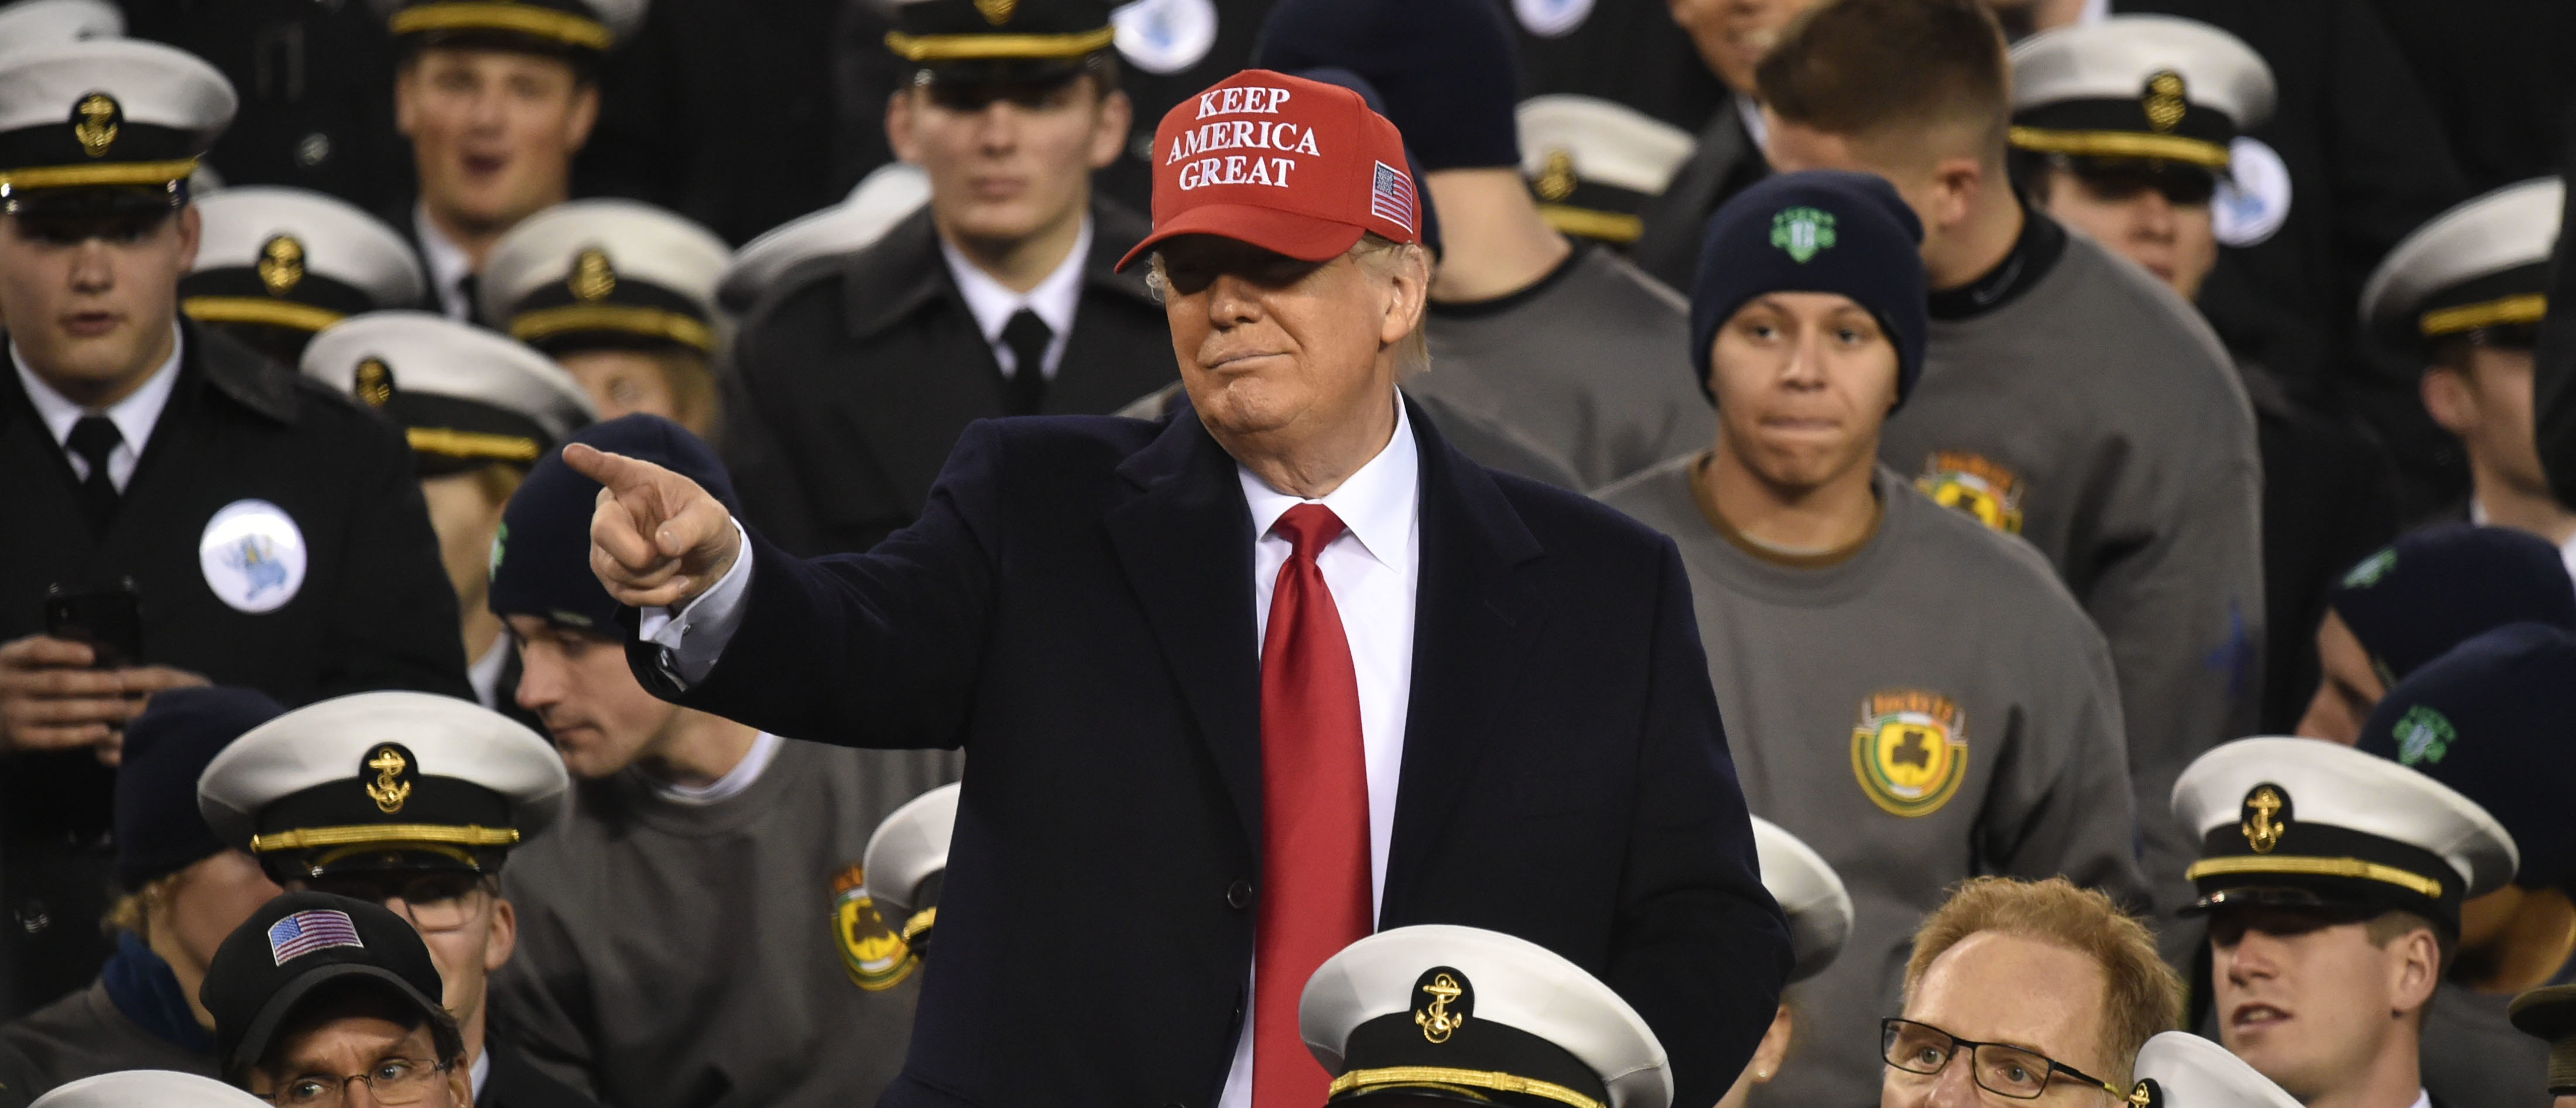 Dec 14, 2019; Philadelphia, PA, USA; President Donal Trump sits with the Navy Midshipmen during half time of the 120th Army-Navy game at Lincoln Financial Field. Mandatory Credit: James Lang-USA TODAY Sports